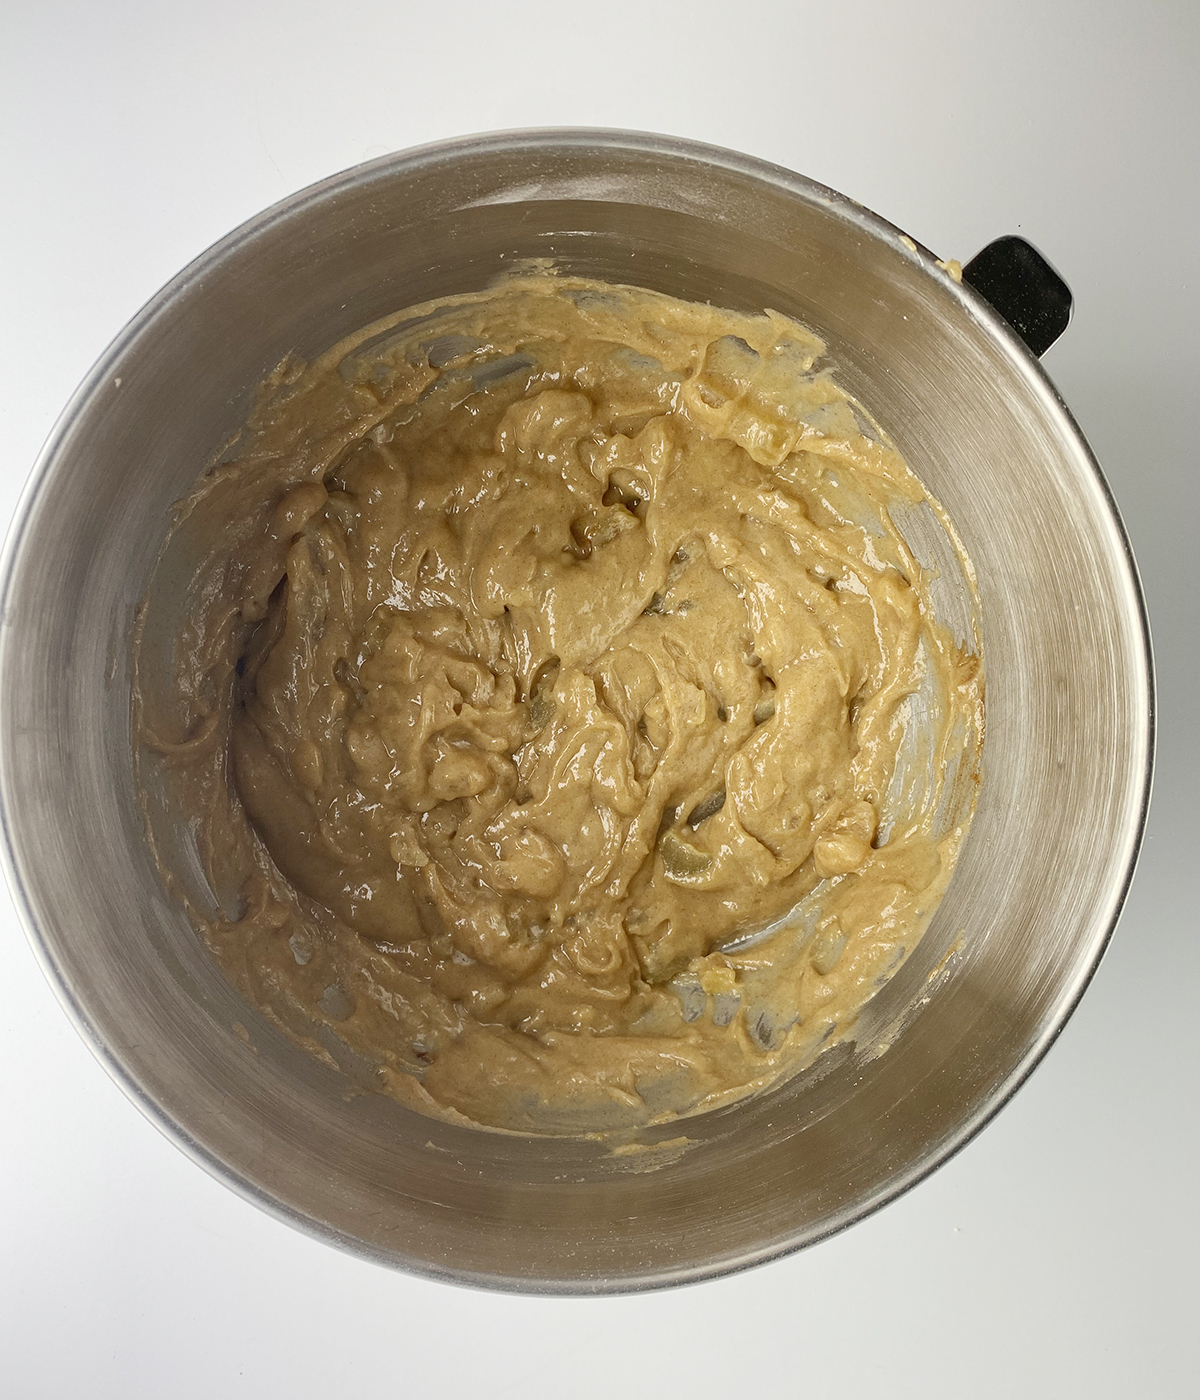 Apple cake batter in a mixing bowl.